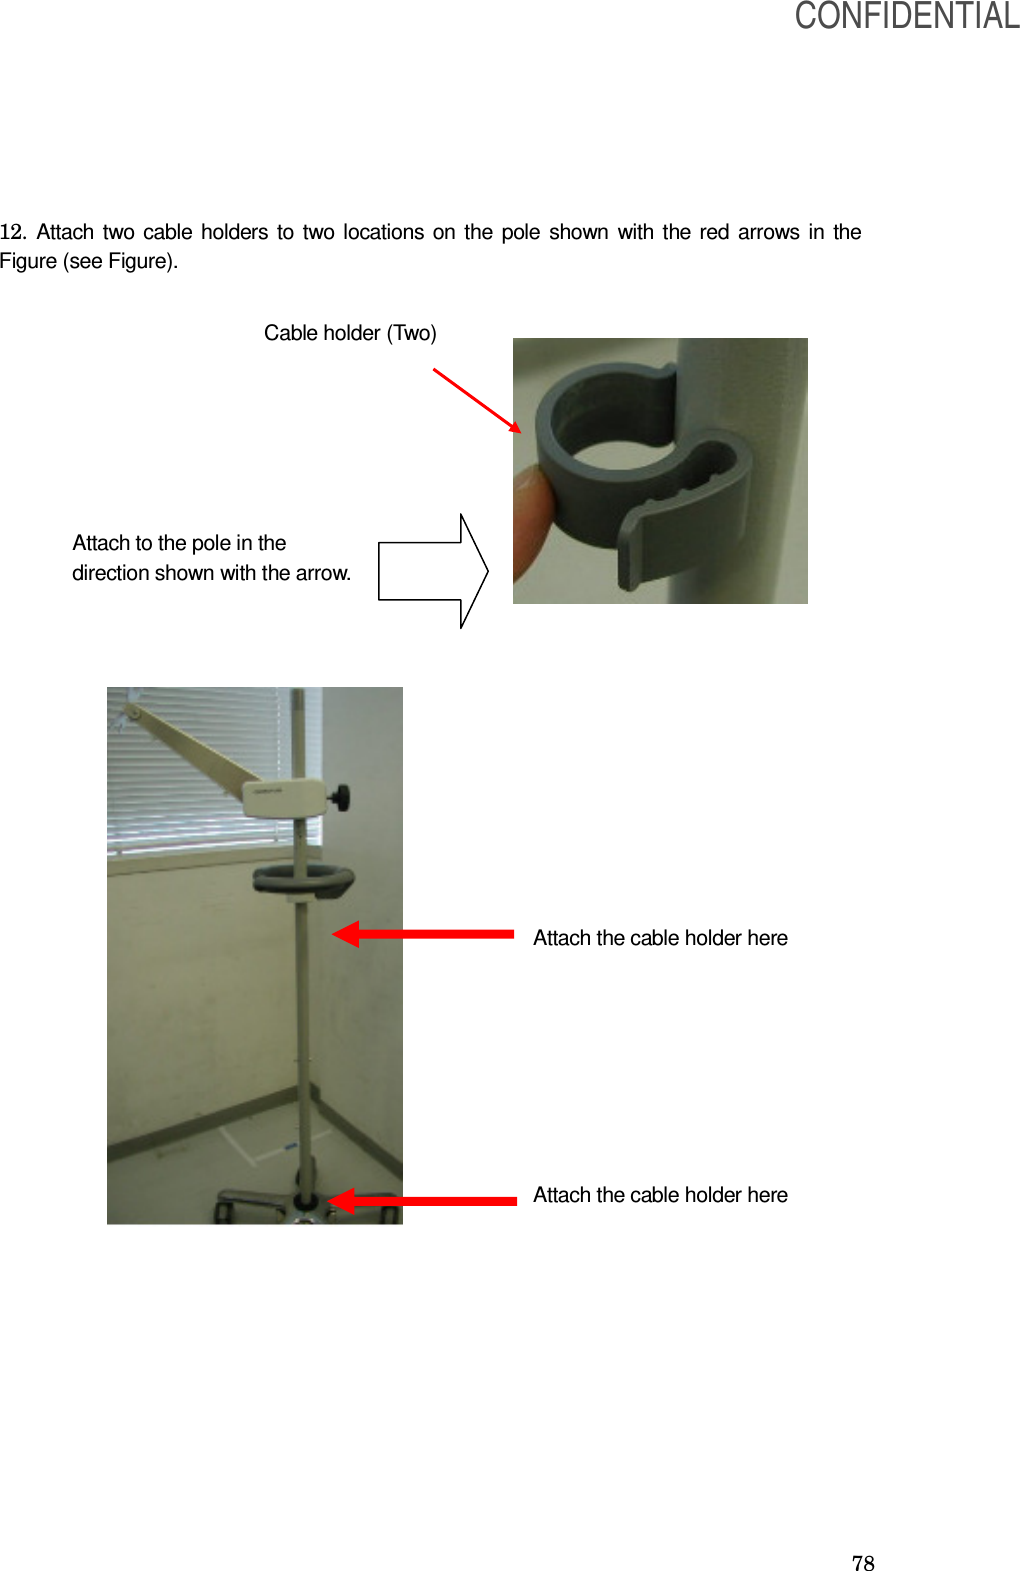  78 12. Attach two cable holders to two locations on the pole shown with the red arrows in the Figure (see Figure).                                   Cable holder (Two) Attach to the pole in the direction shown with the arrow.  Attach the cable holder here Attach the cable holder here CONFIDENTIAL